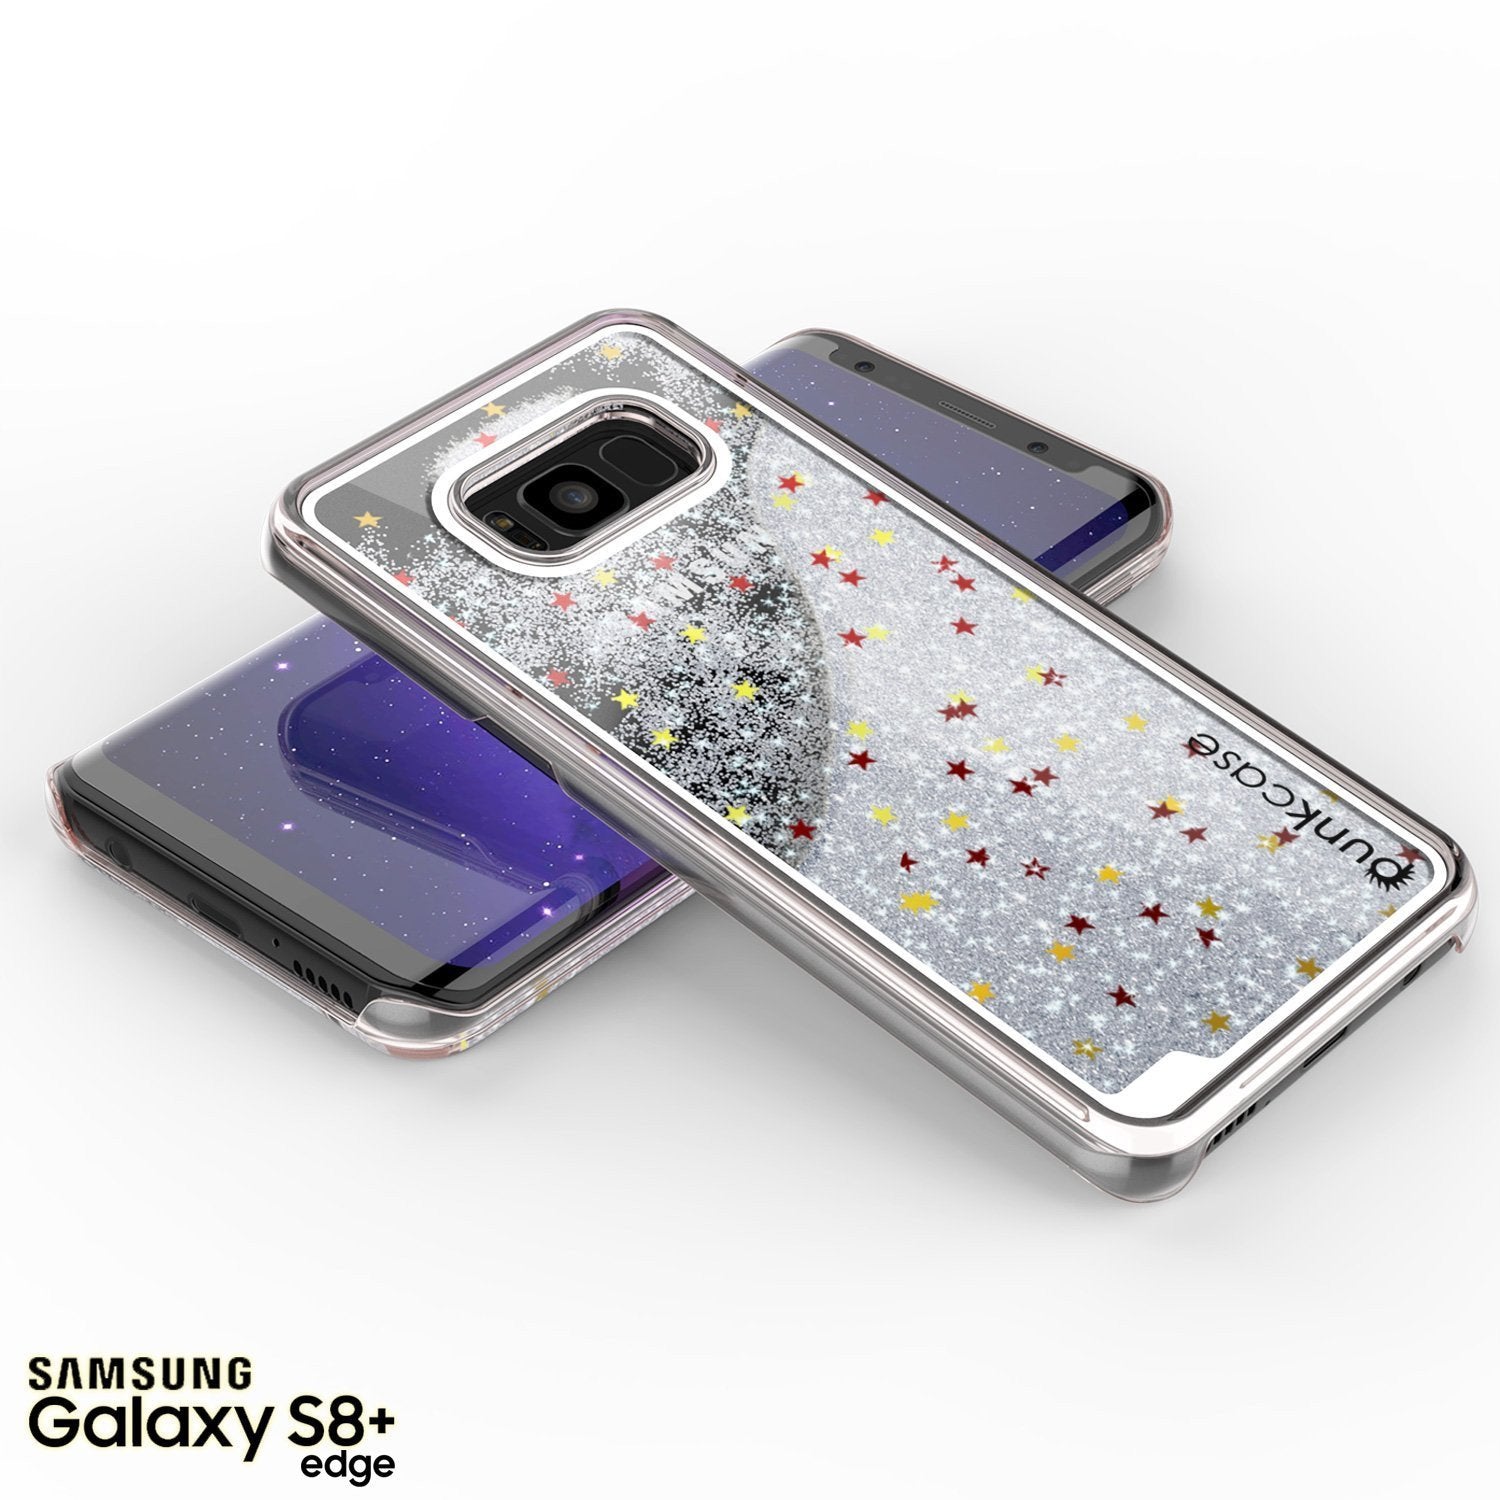 S8 Plus Case, Punkcase Liquid Silver Series Protective Dual Layer Floating Glitter Cover